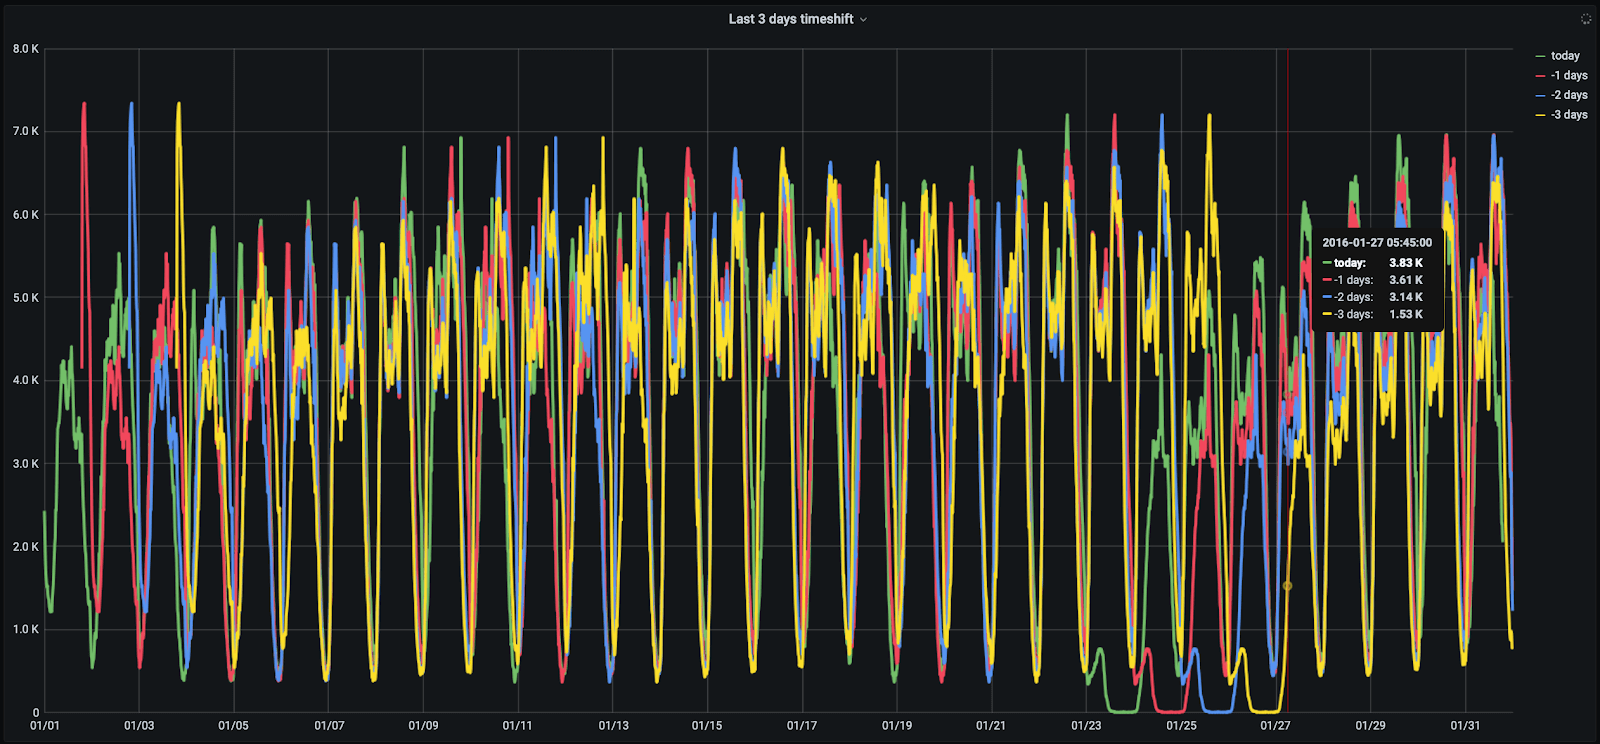 Graph showing taxi rides in January 2016 along with timeshifts for the previous 3 days